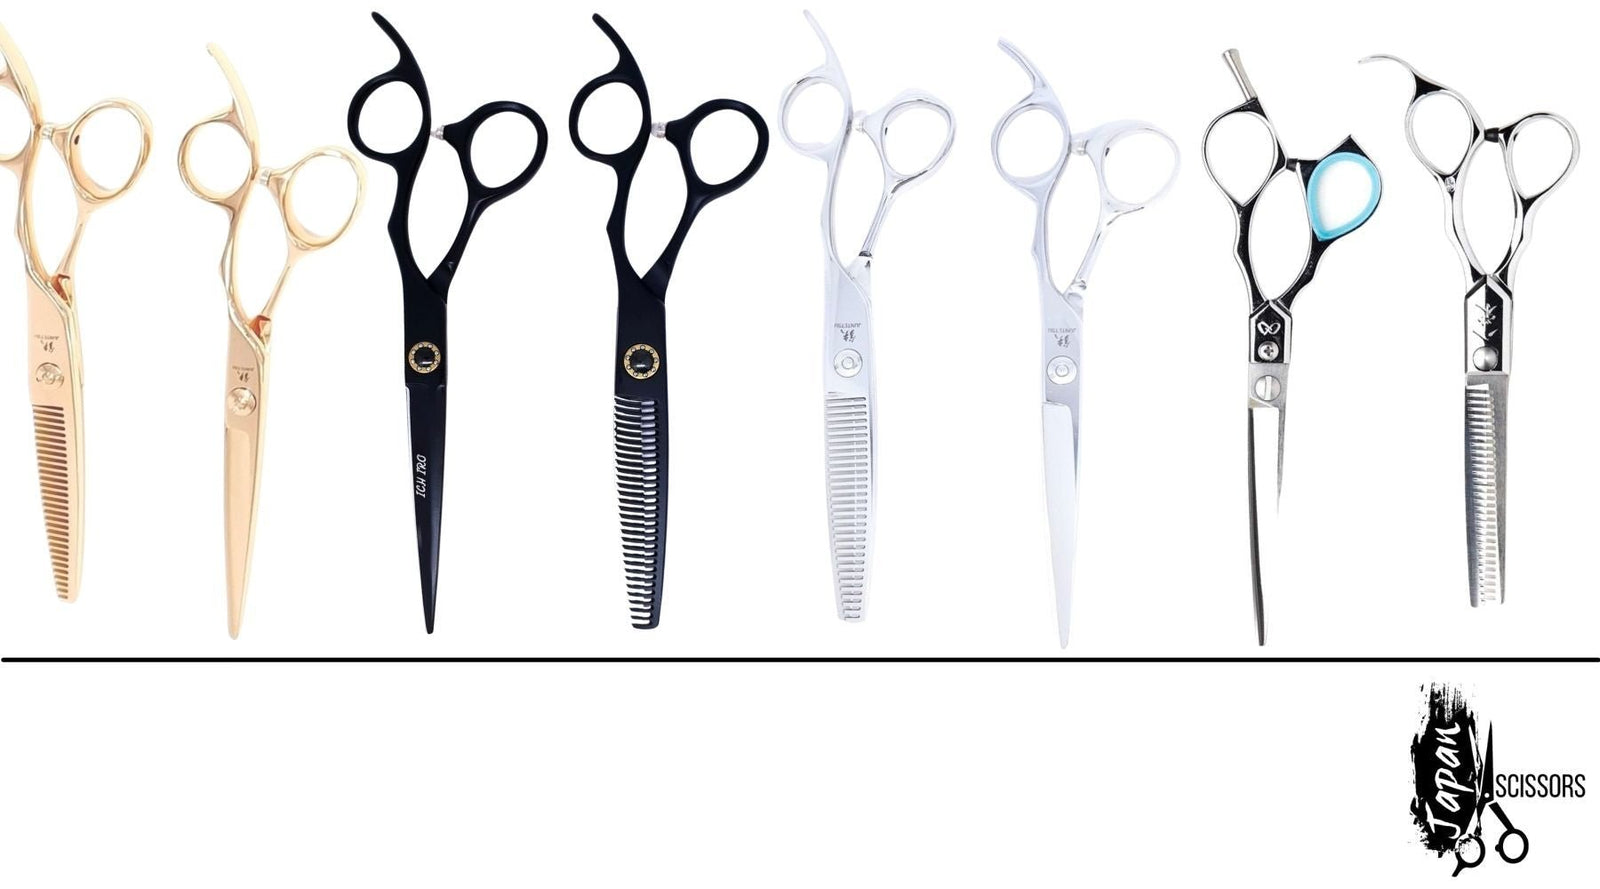 Hair Cutting Scissors Shears Set, ekuci Professional Home Haircutting  Scissors Thinning Shears Kit with Free Comb and Storage Bag for Men Women  Home